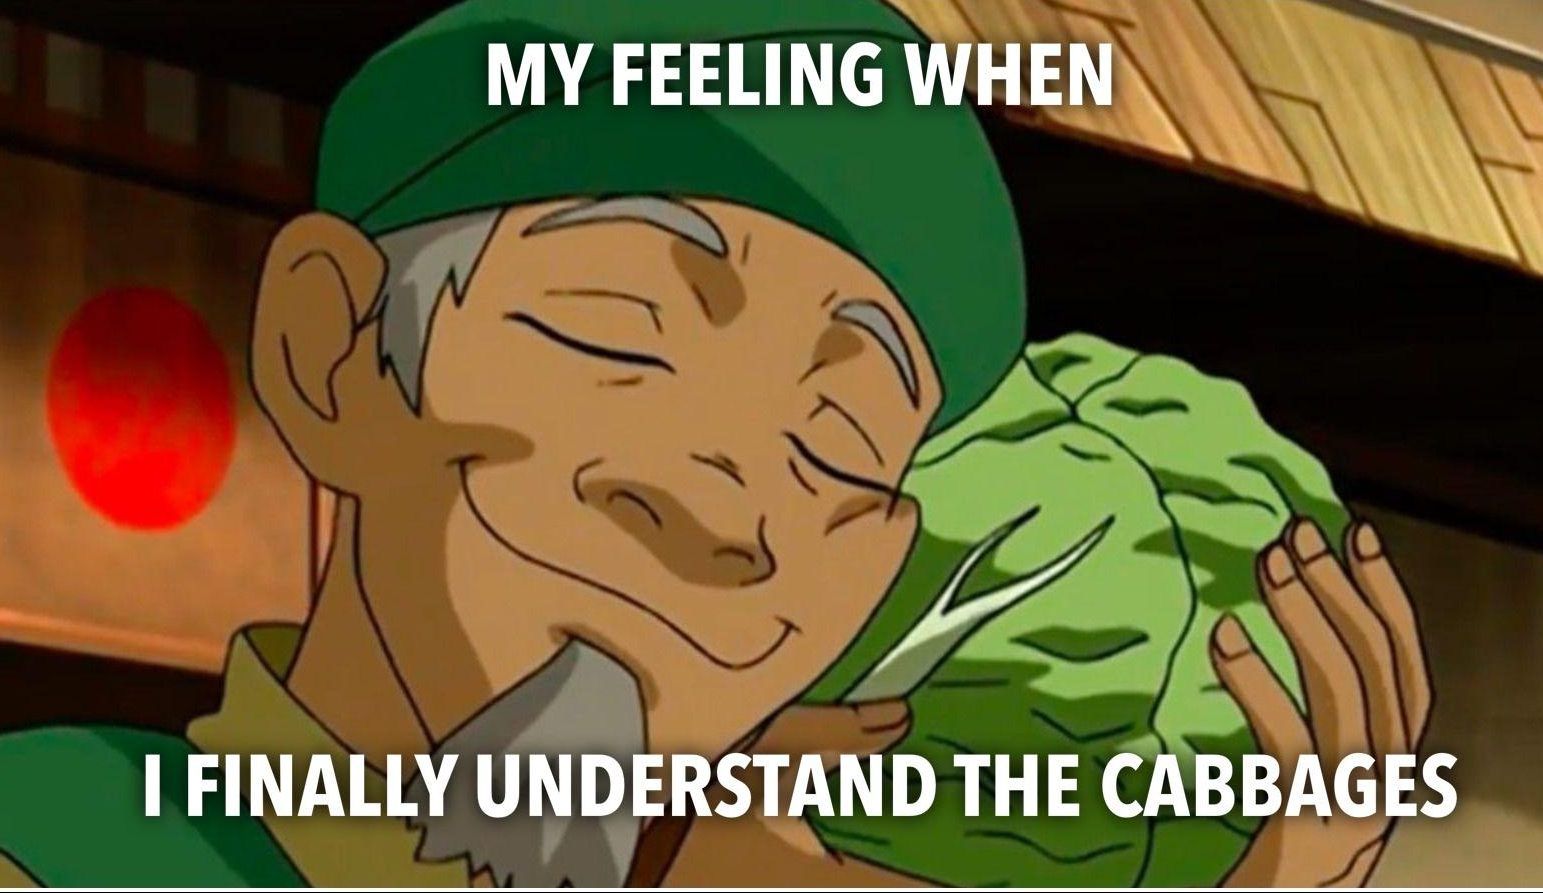 my-feeling-when-i-understand-the-cabbages-cabbage-man-meme-e1605134238129.jpg